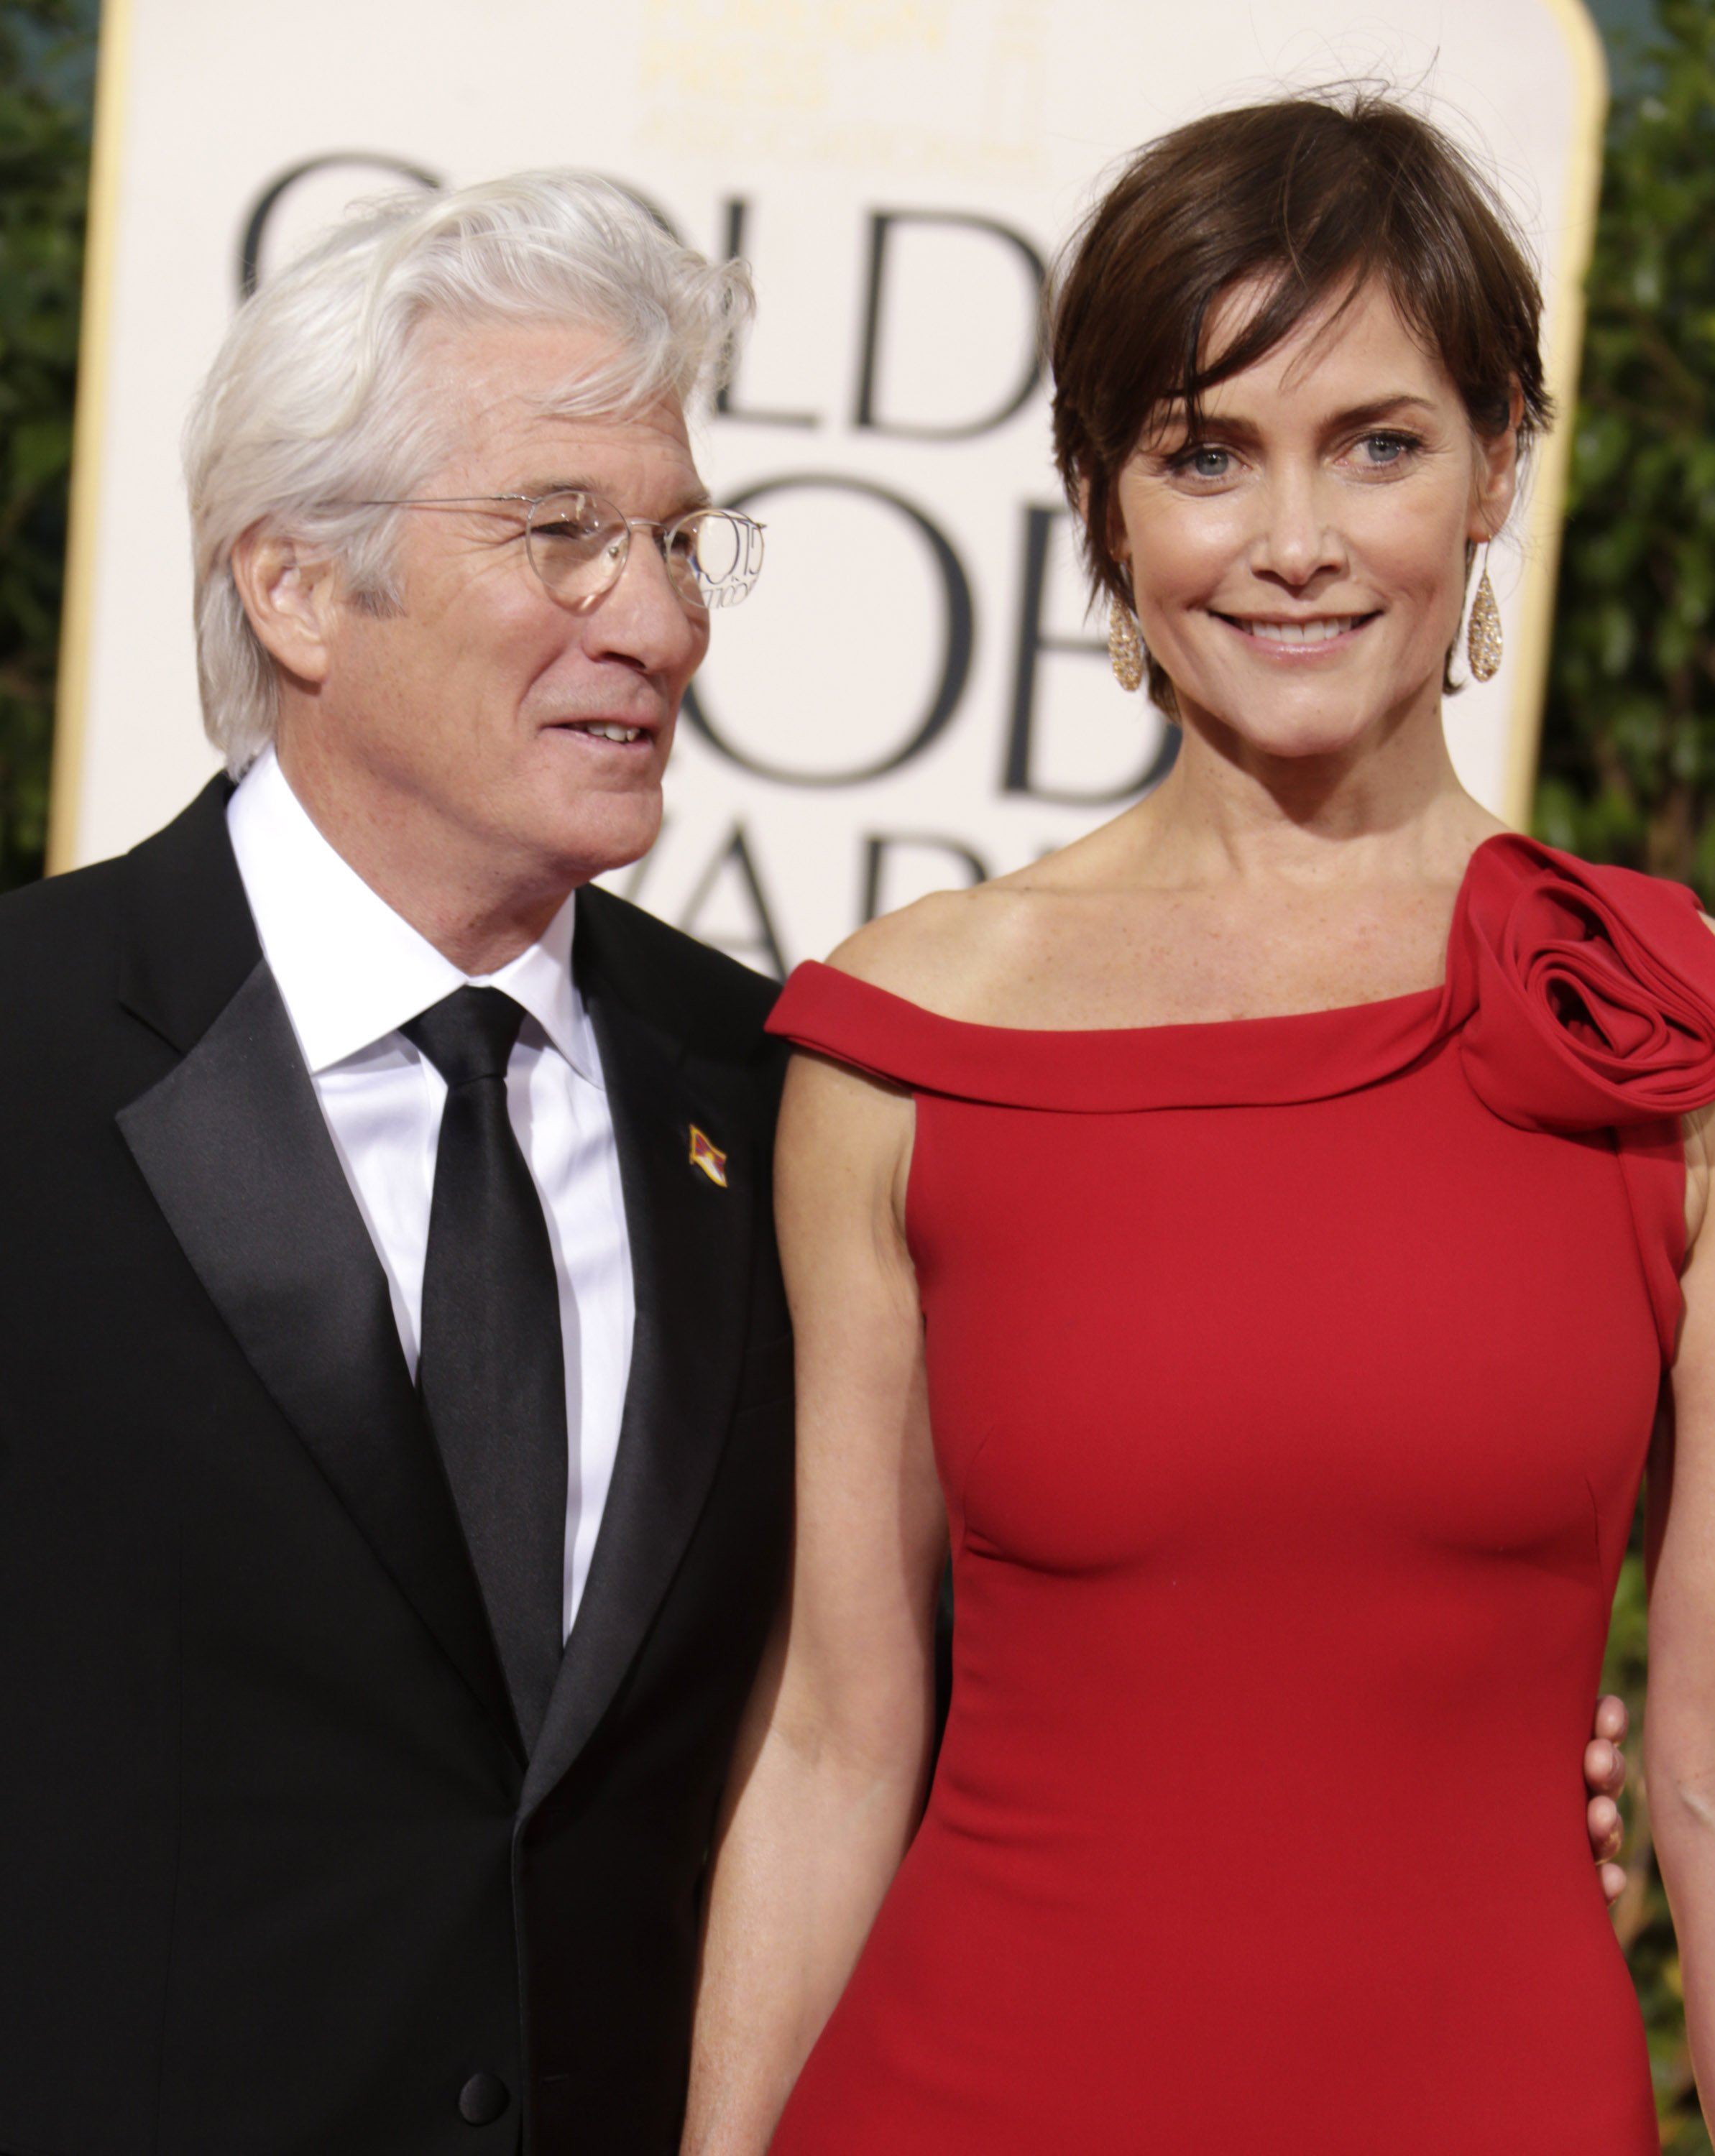 Richard Gere and Carey Lowell arrive at the 70th Annual Golden Globe Awards held at The Beverly Hilton Hotel on January 13, 2013 in Beverly Hills, California | Source: Getty Images 